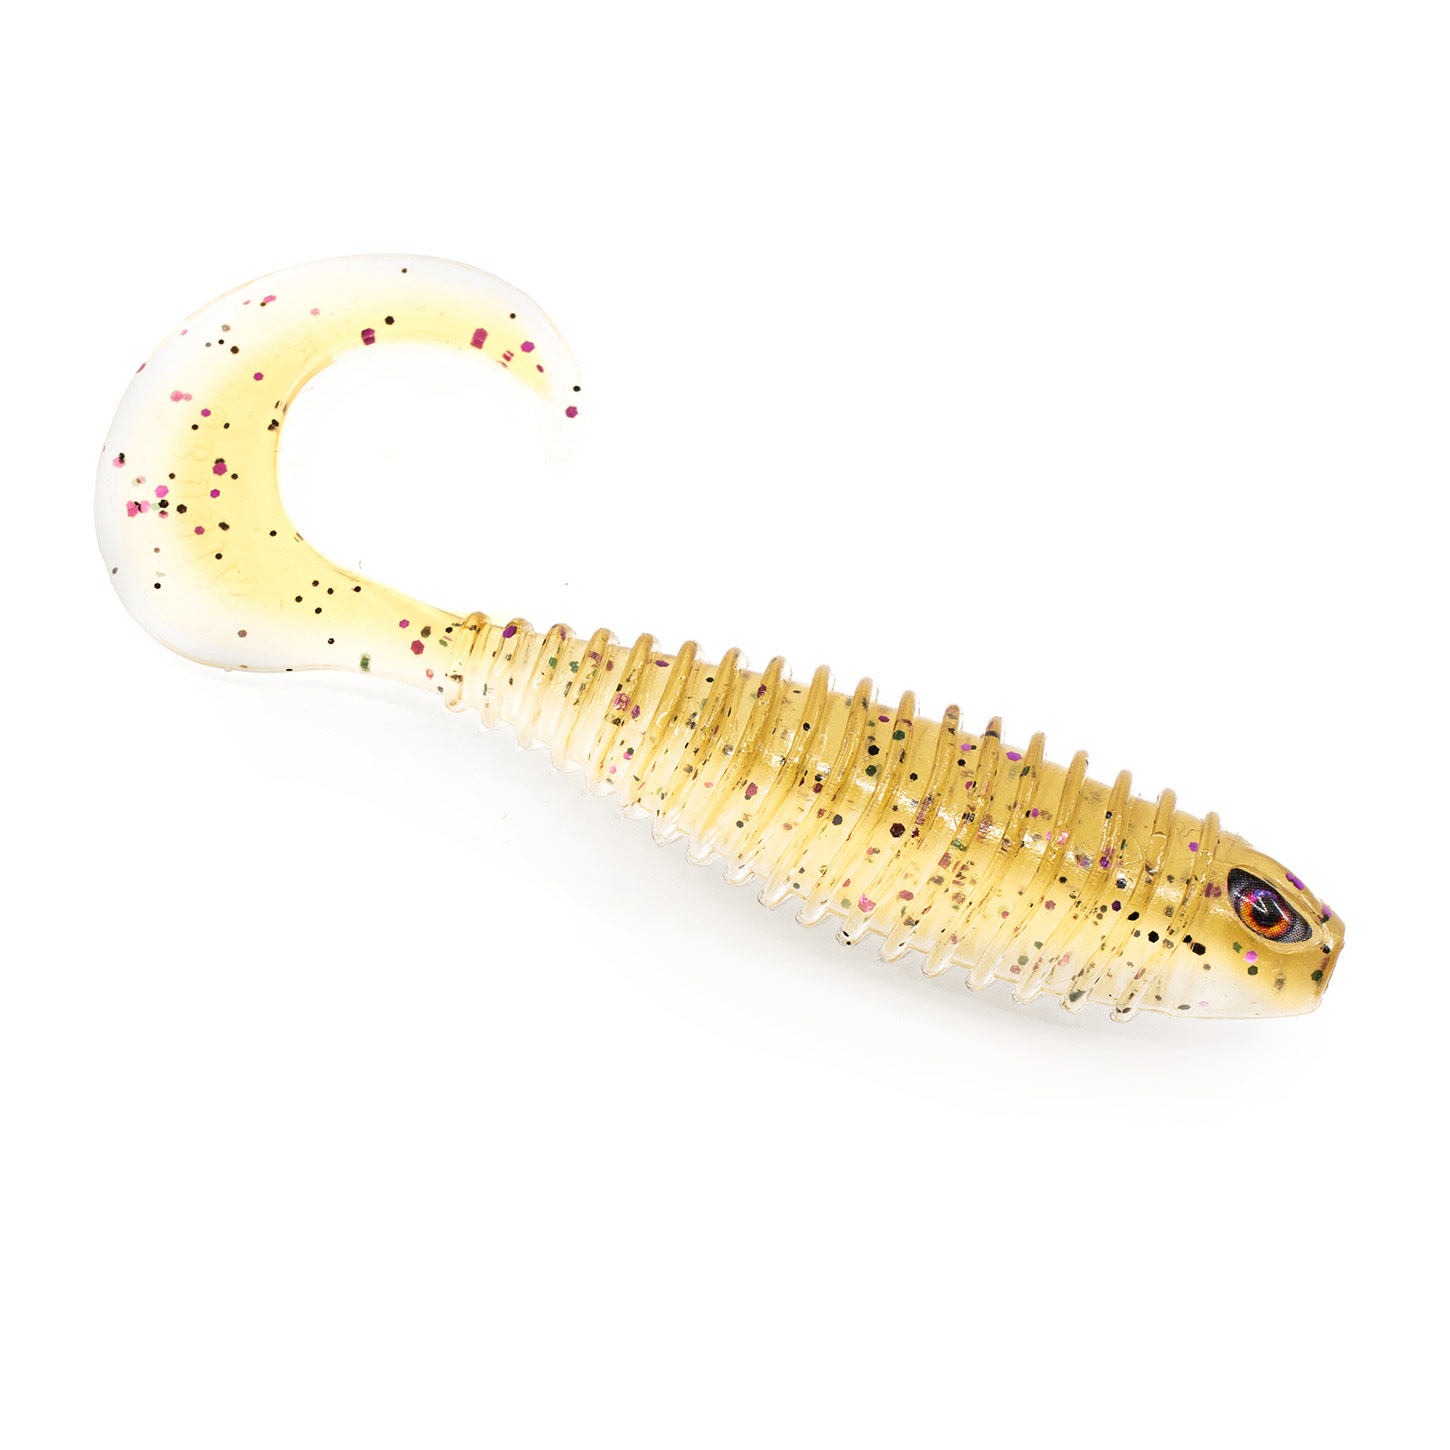 CURLY BAIT – River2sea Brands